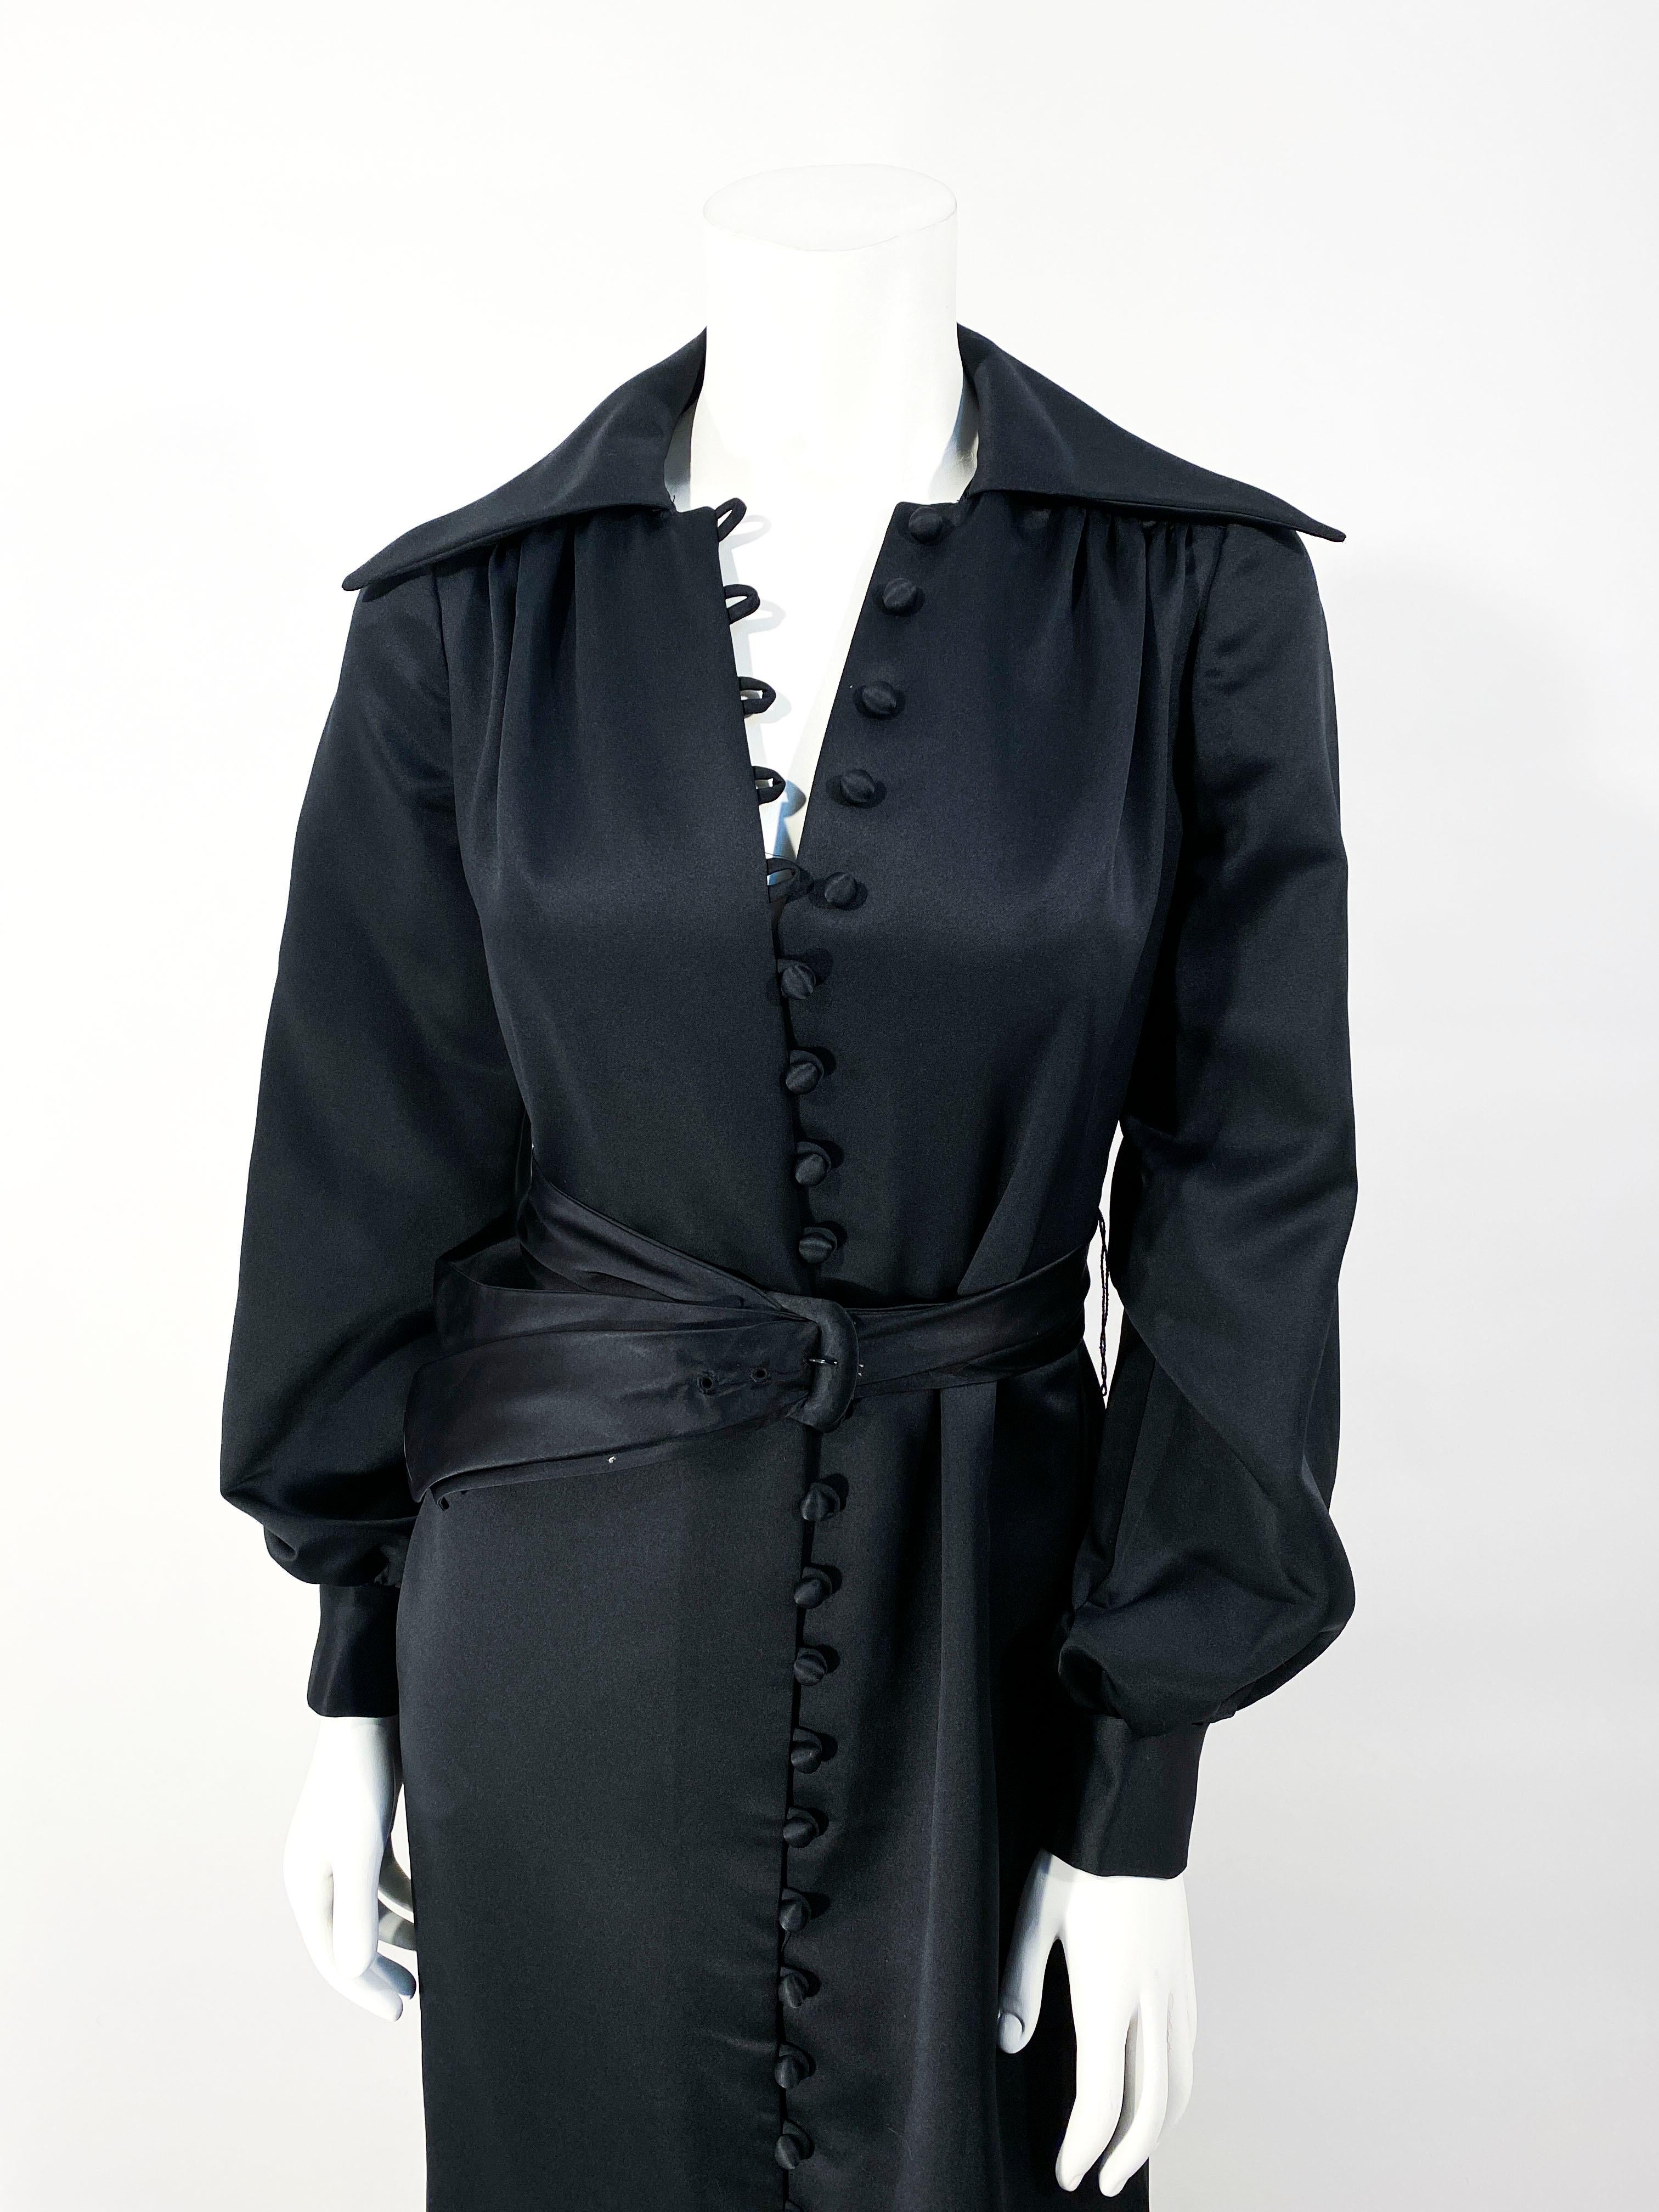 1970s The Eva Gabor Look by Estevez black satin full length dress coat with hand covered buttons, cuffed bishop sleeves. This piece was styled and photographed with a belt that is not included with the purchase of the dress. 